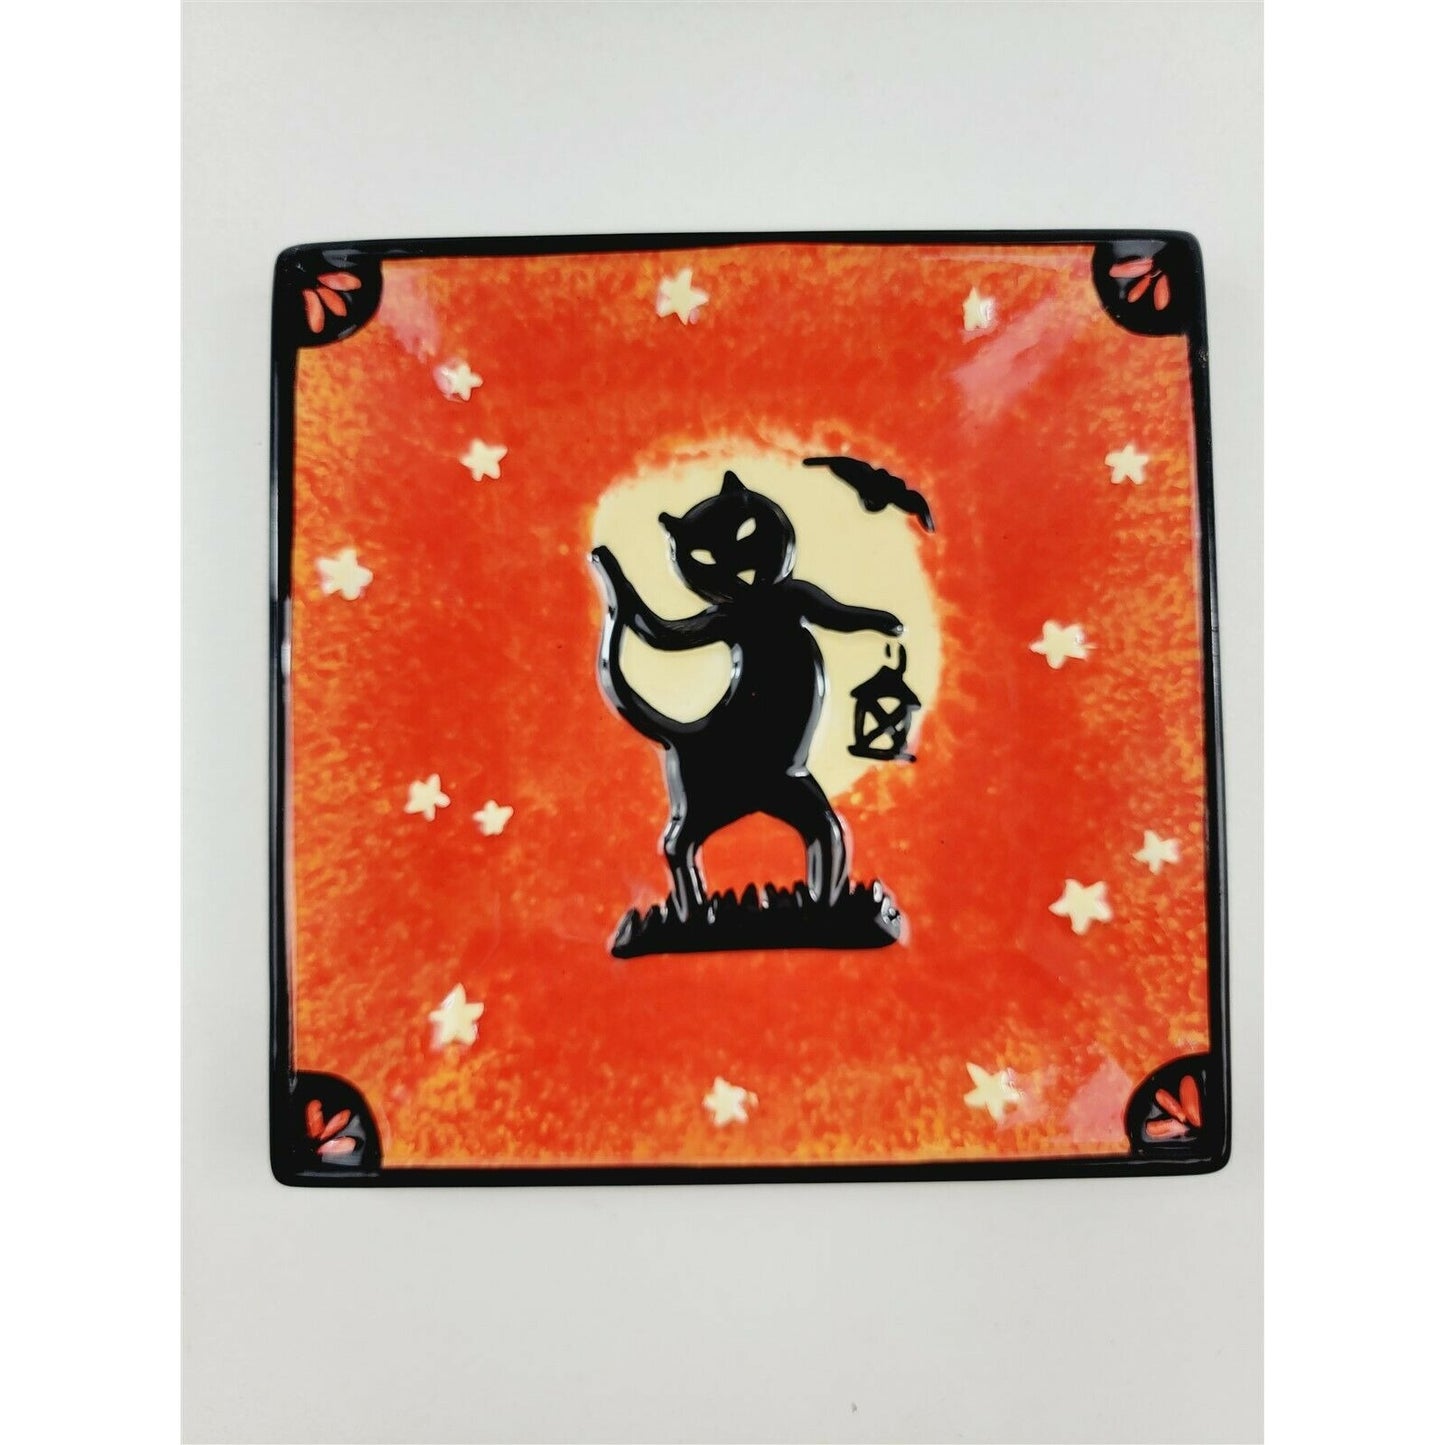 2 Vintage Handpainted Halloween Square Plates Black Cat Witch Riding Broom 6"